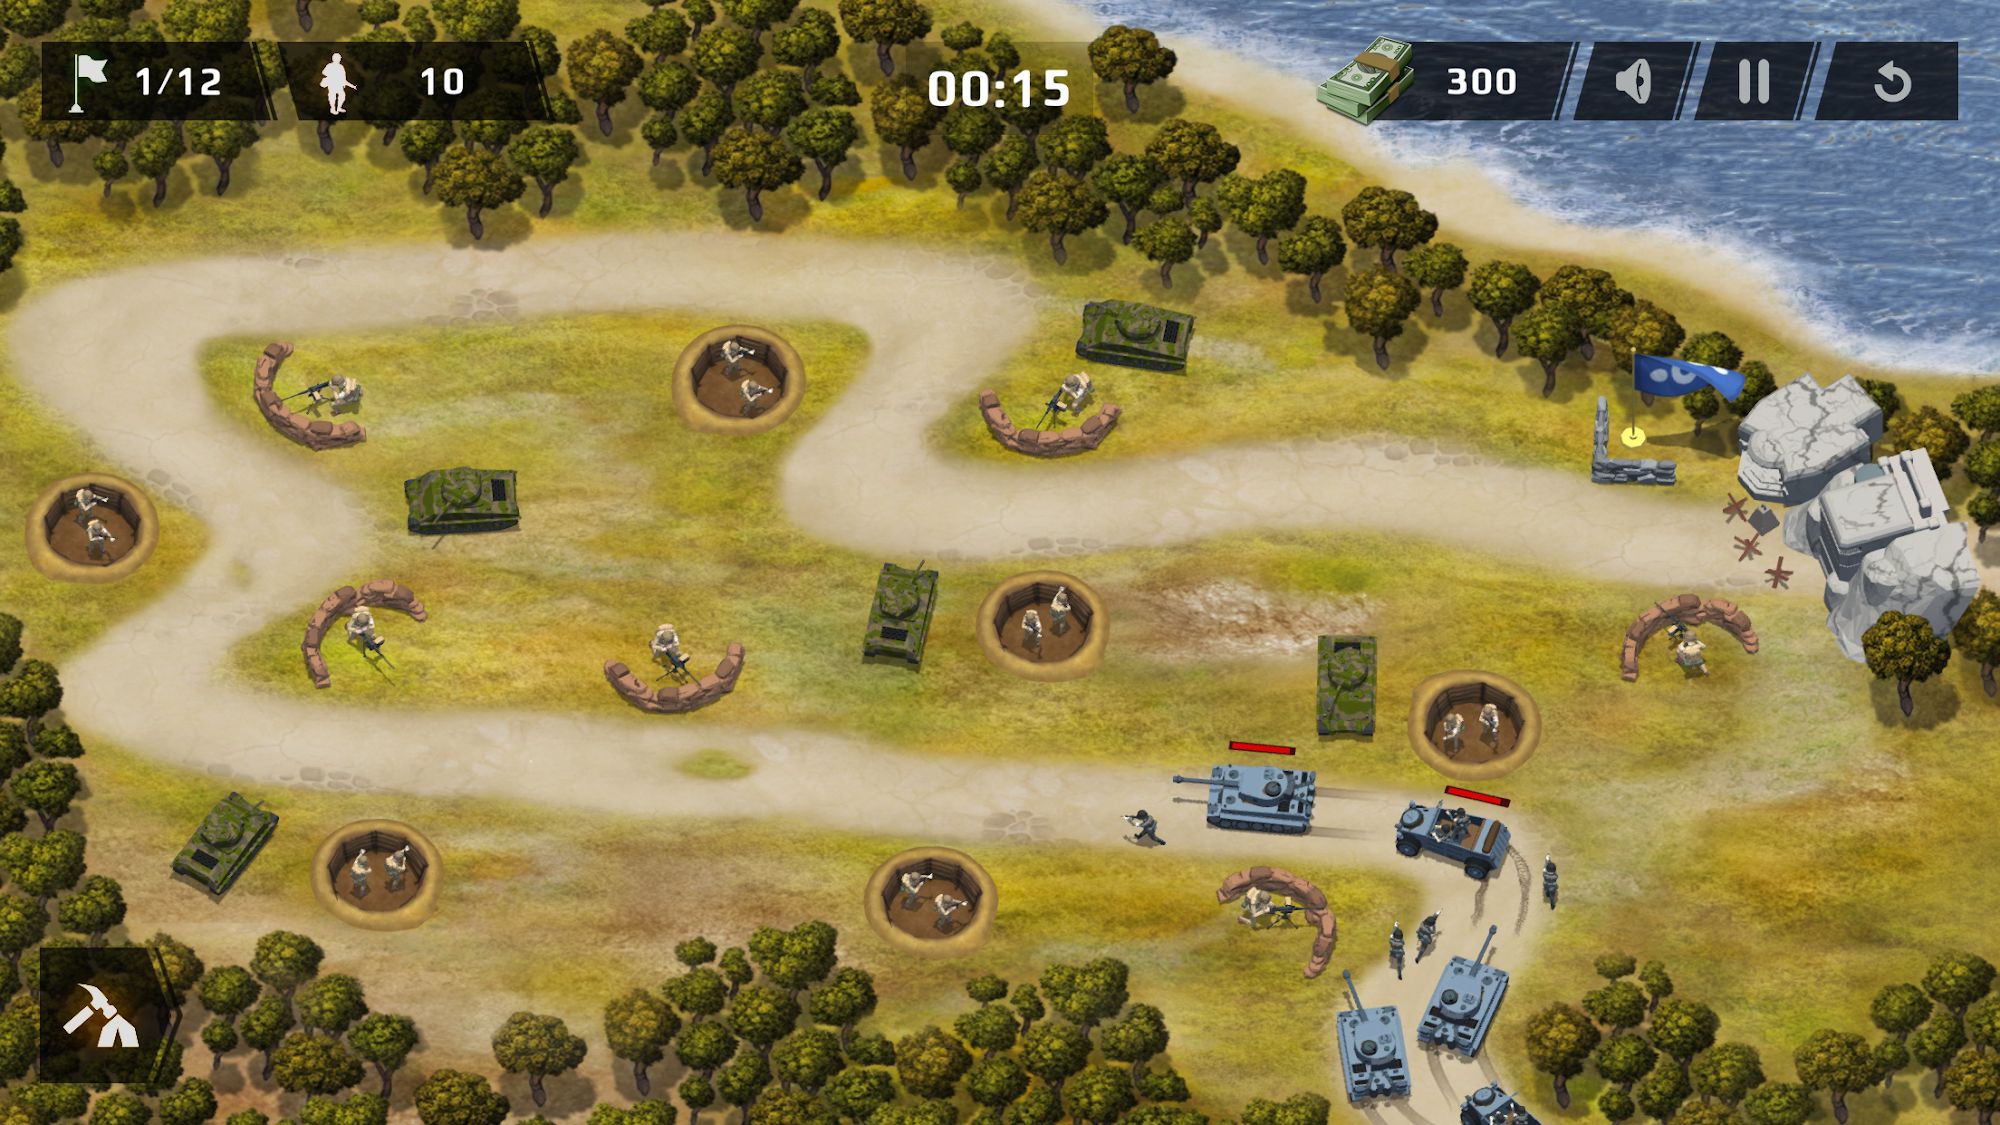 Télécharger WWII Defense: RTS Army TD game pour Android A.n.d.r.o.i.d. .5...0. .a.n.d. .m.o.r.e gratuit.